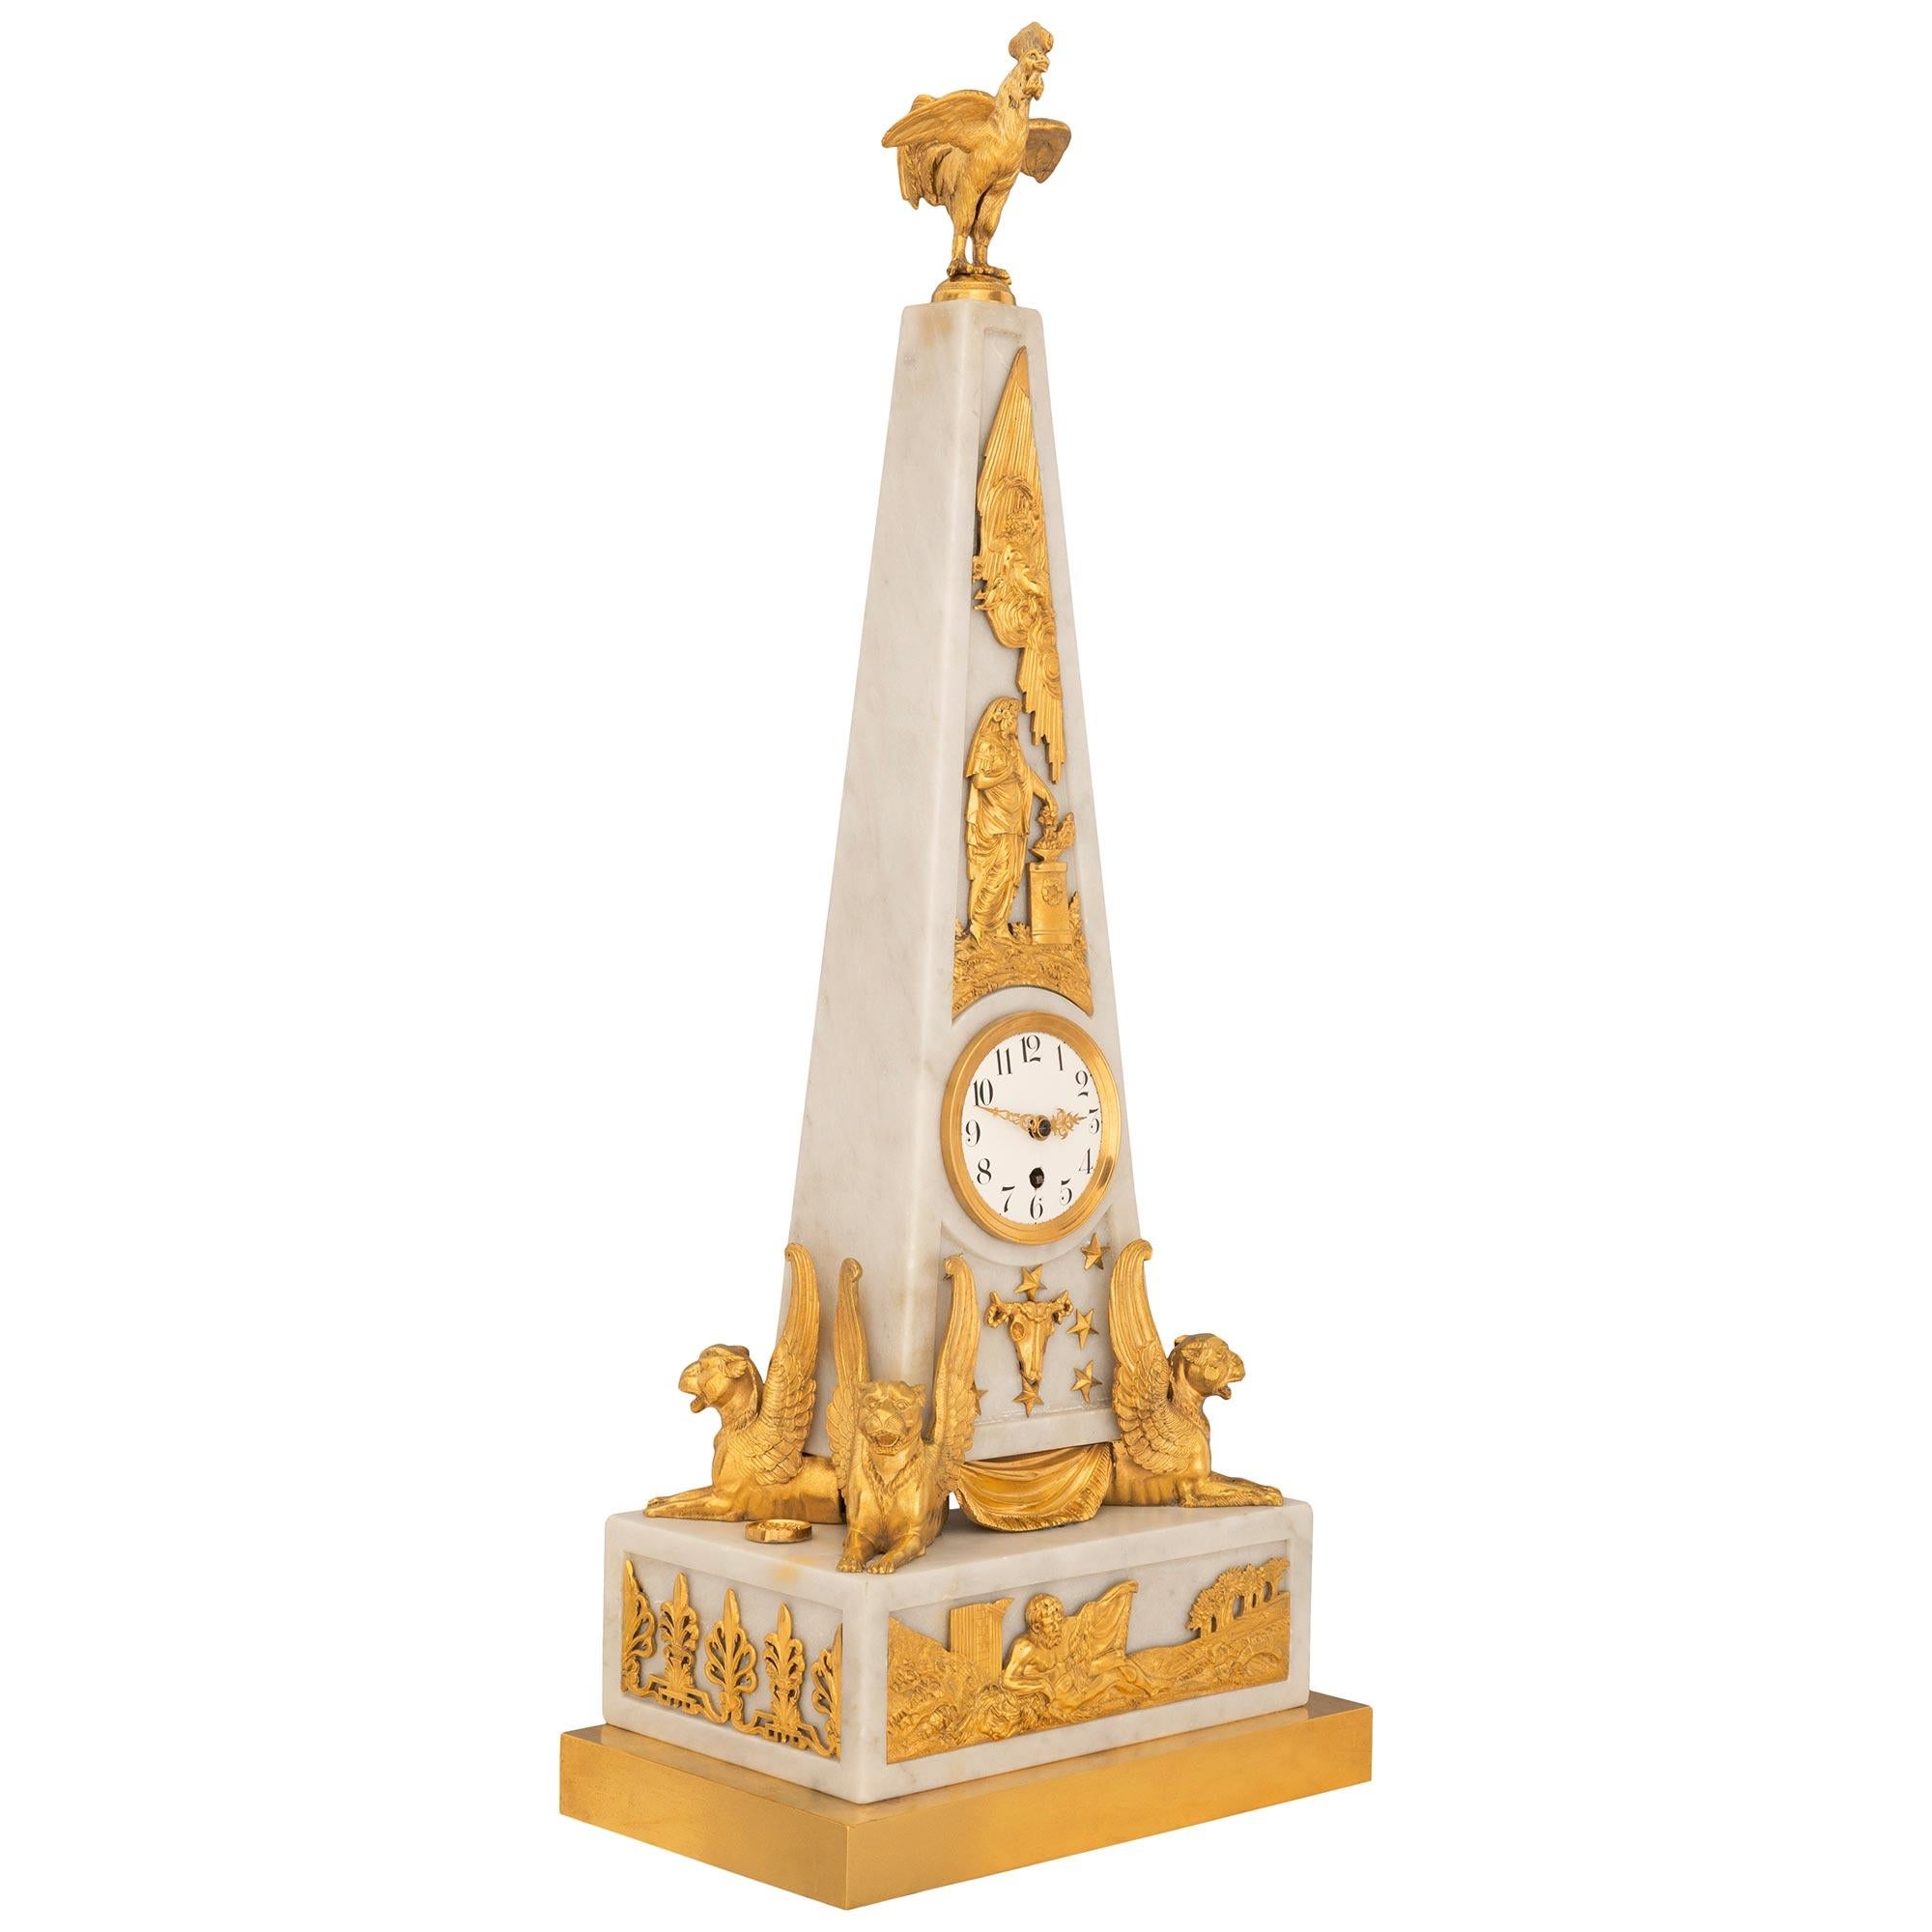 A striking and unique French early 19th century Neo-Classical st. white Carrara marble and ormolu obelisk shaped clock. The clock is raised by a rectangular white Carrara marble base with a thick bottom ormolu band and superb richly chased fitted